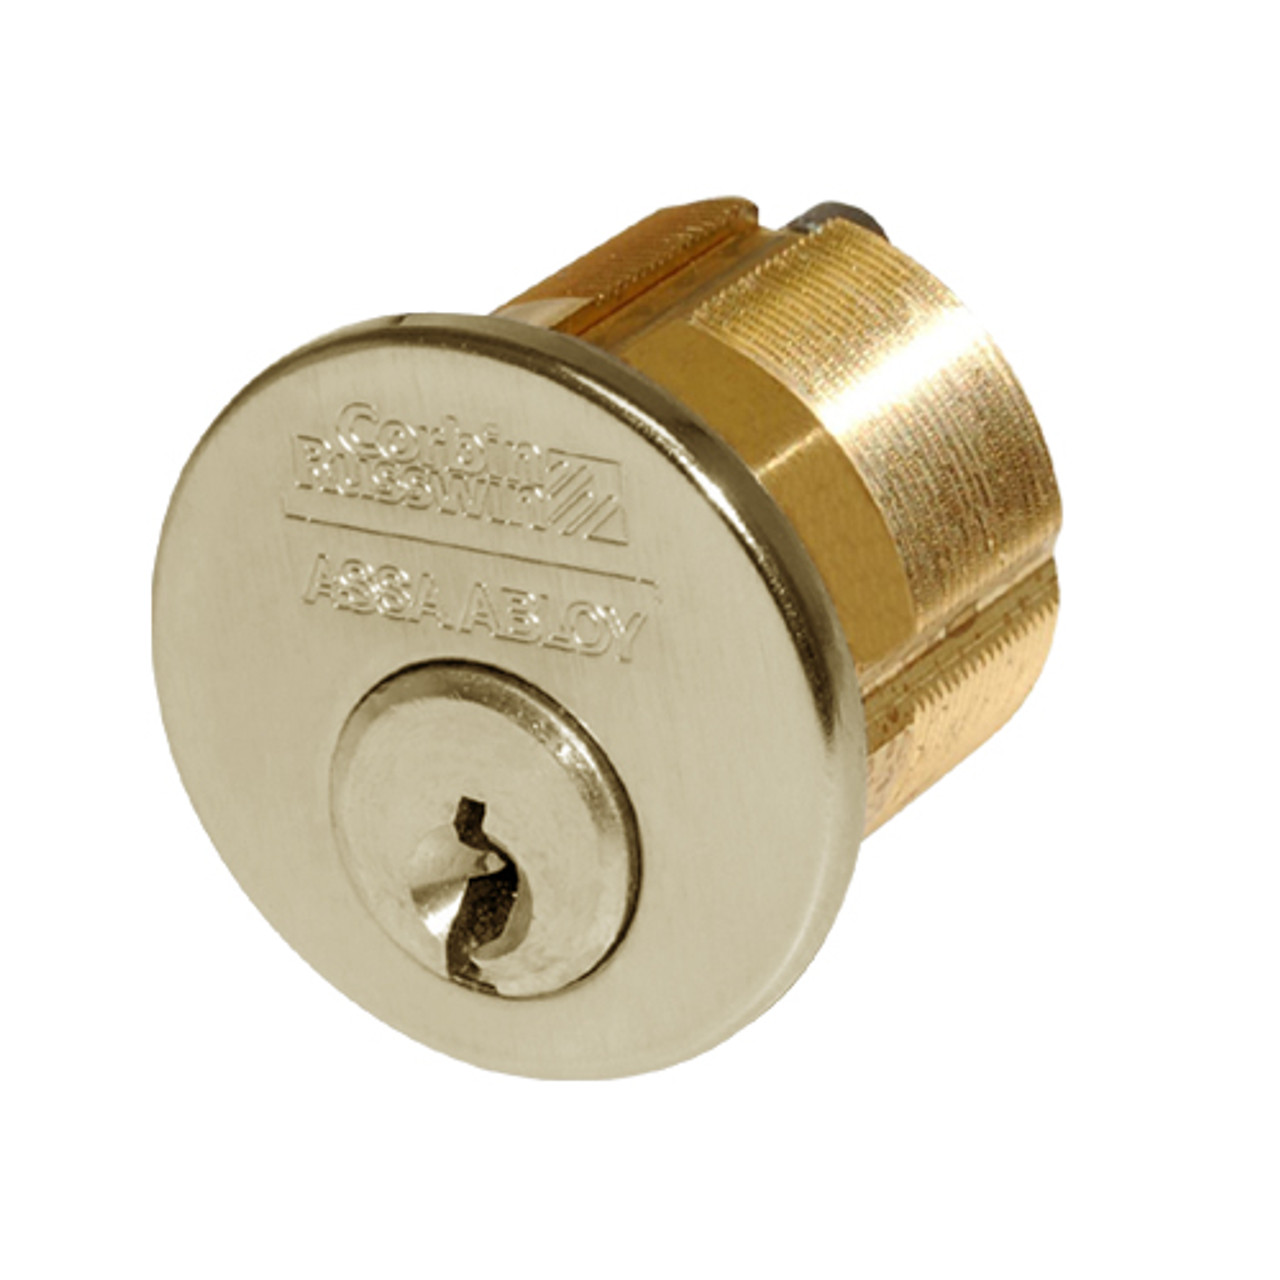 CR1000-200-A02-6-57B1-606 Corbin Conventional Mortise Cylinder for Mortise Lock and DL3000 Deadlocks with Straight Cam in Satin Brass Finish